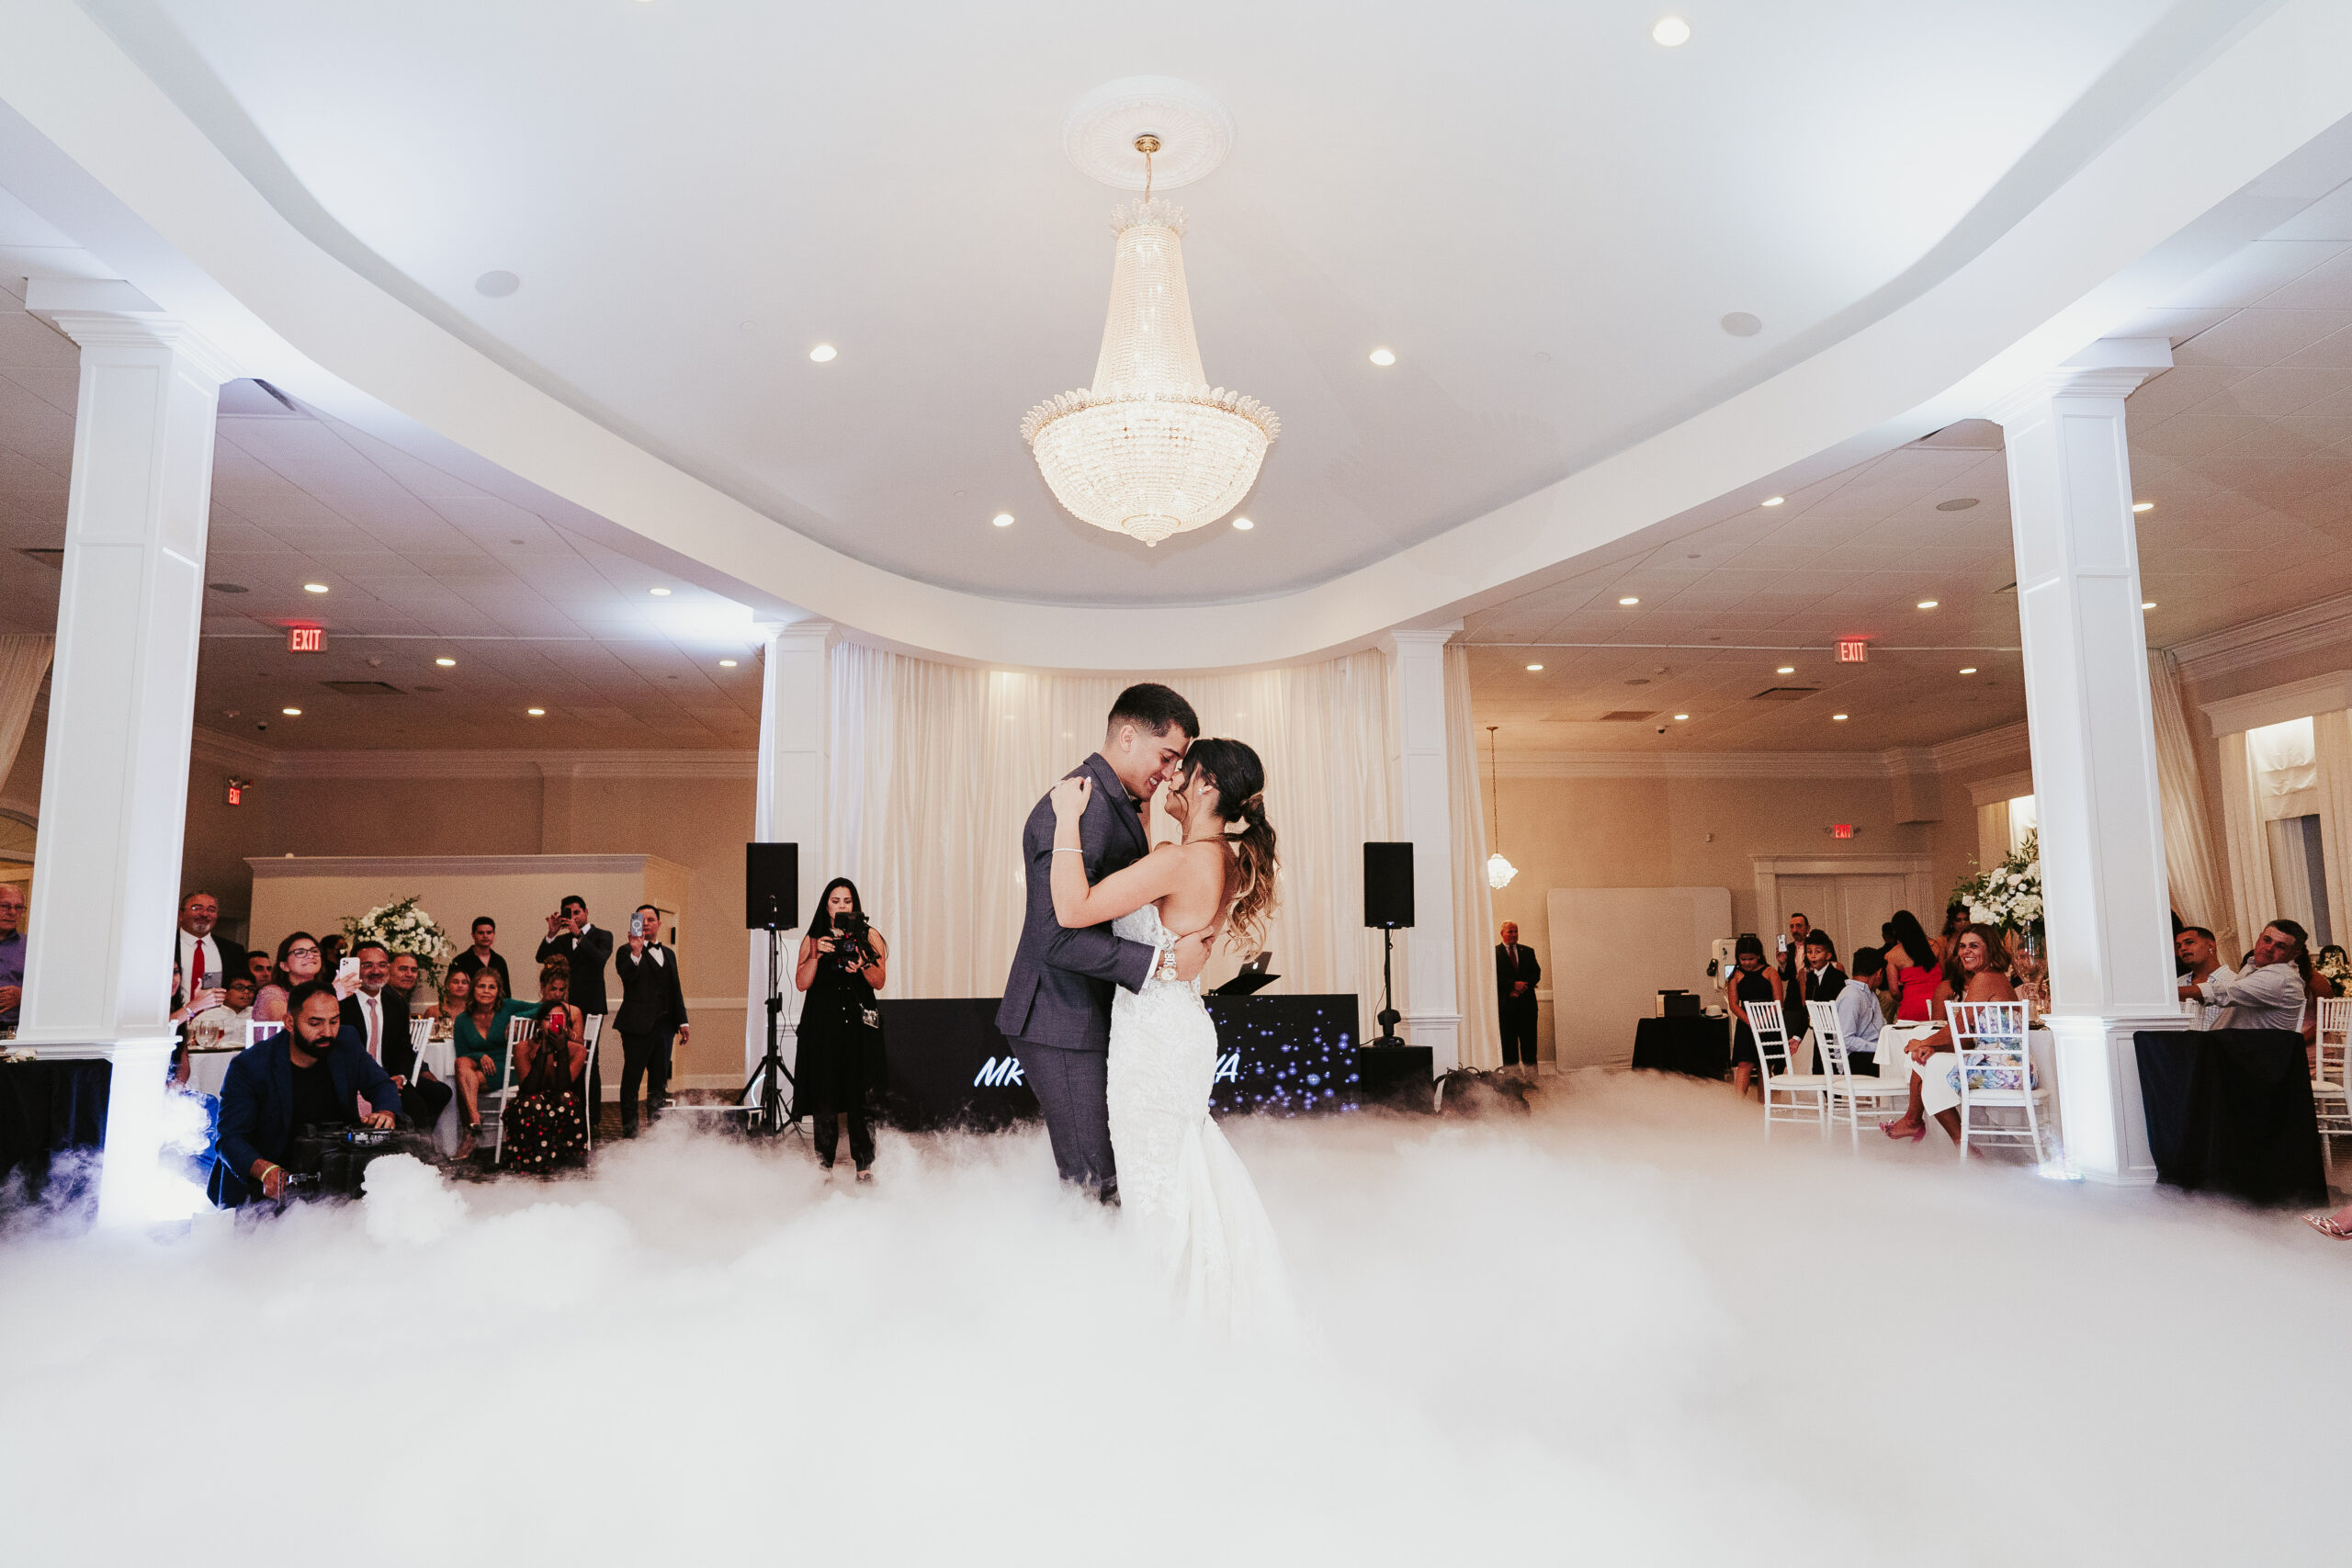 Bride and Groom Dancing in the Clouds at Avenir